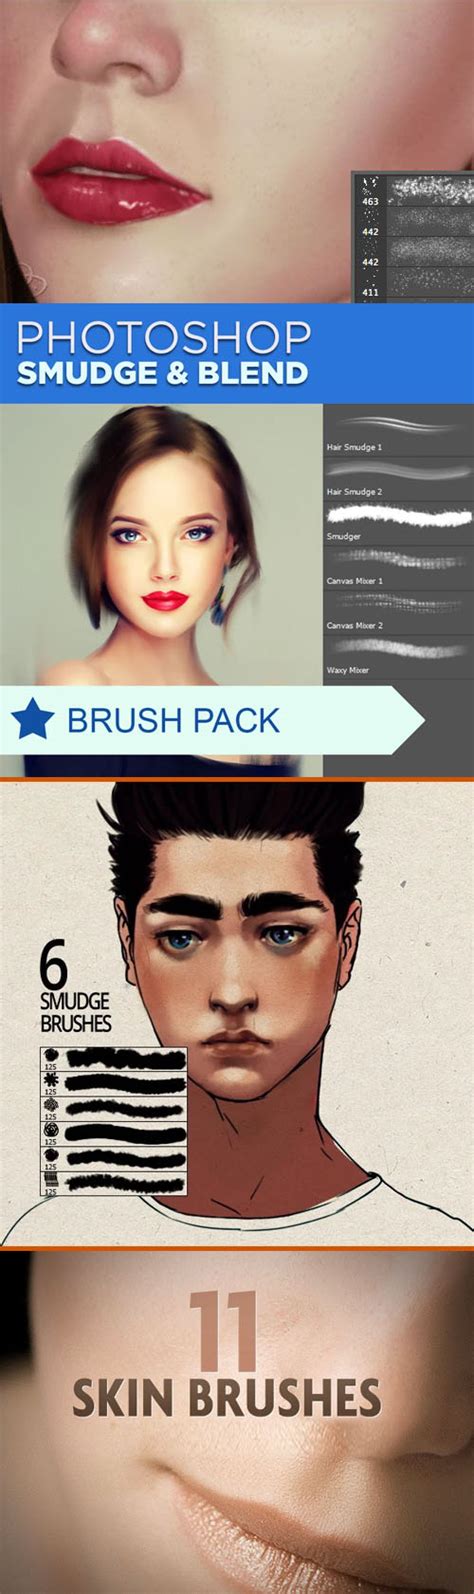 Human Skin & Smudge Brushes Collection for Photoshop » NULLED.org | Best files everyday